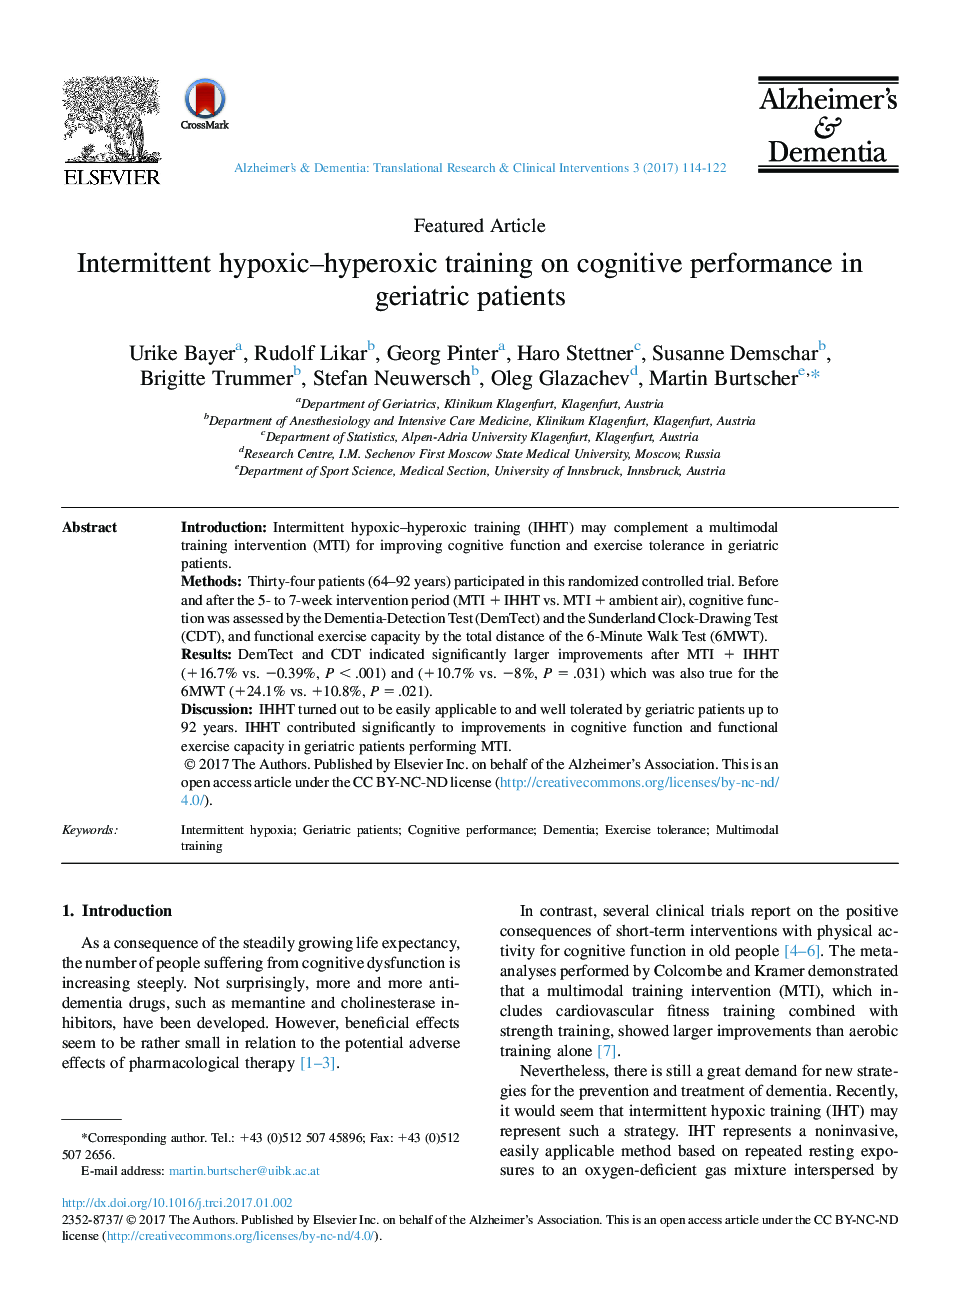 Intermittent hypoxic-hyperoxic training on cognitive performance in geriatric patients